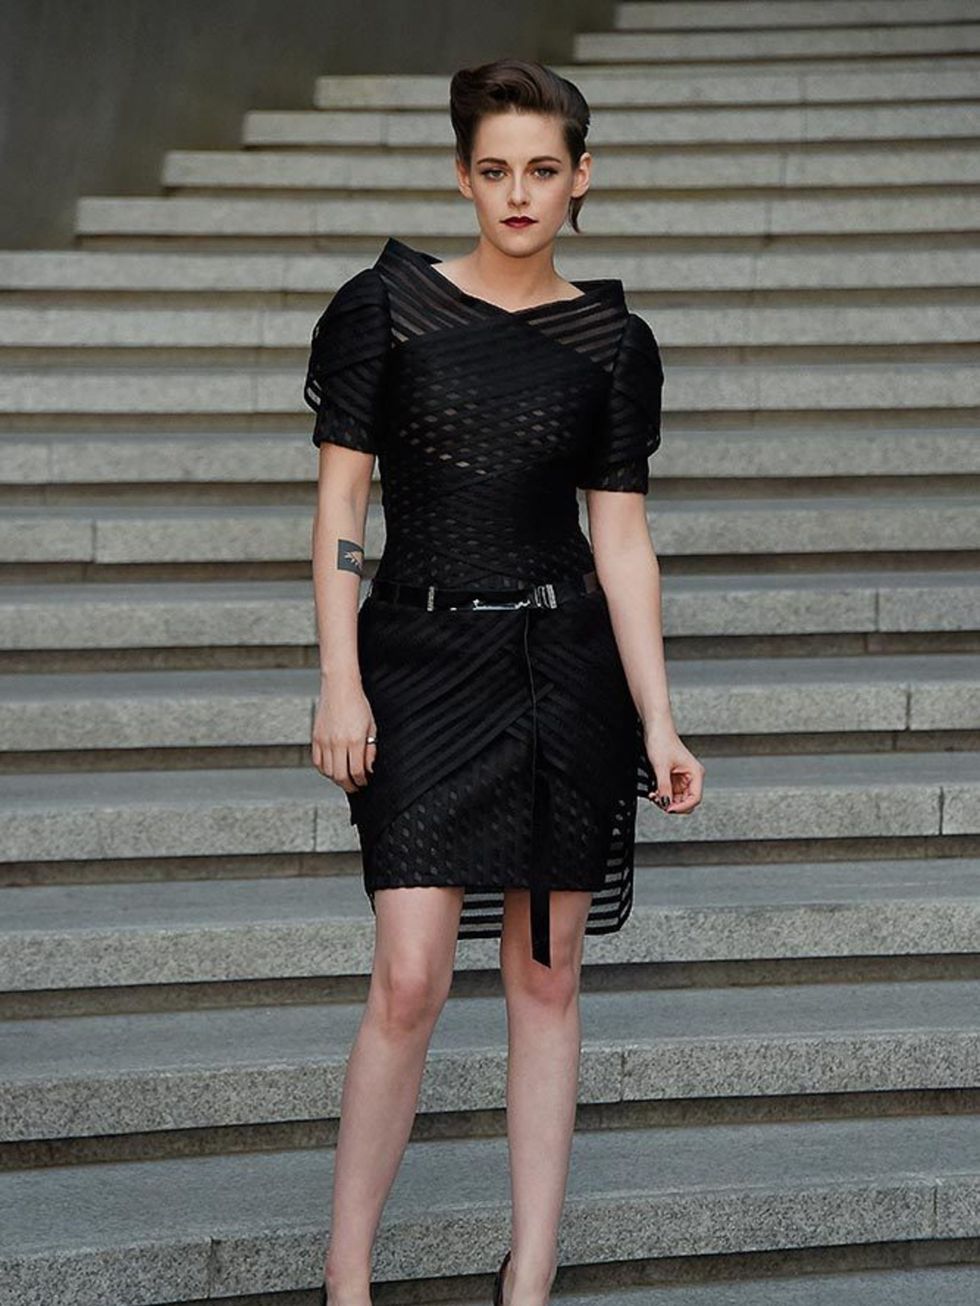 Kristen Stewart attends the Chanel Cruise 2015/16 show in Seoul, May 2015.